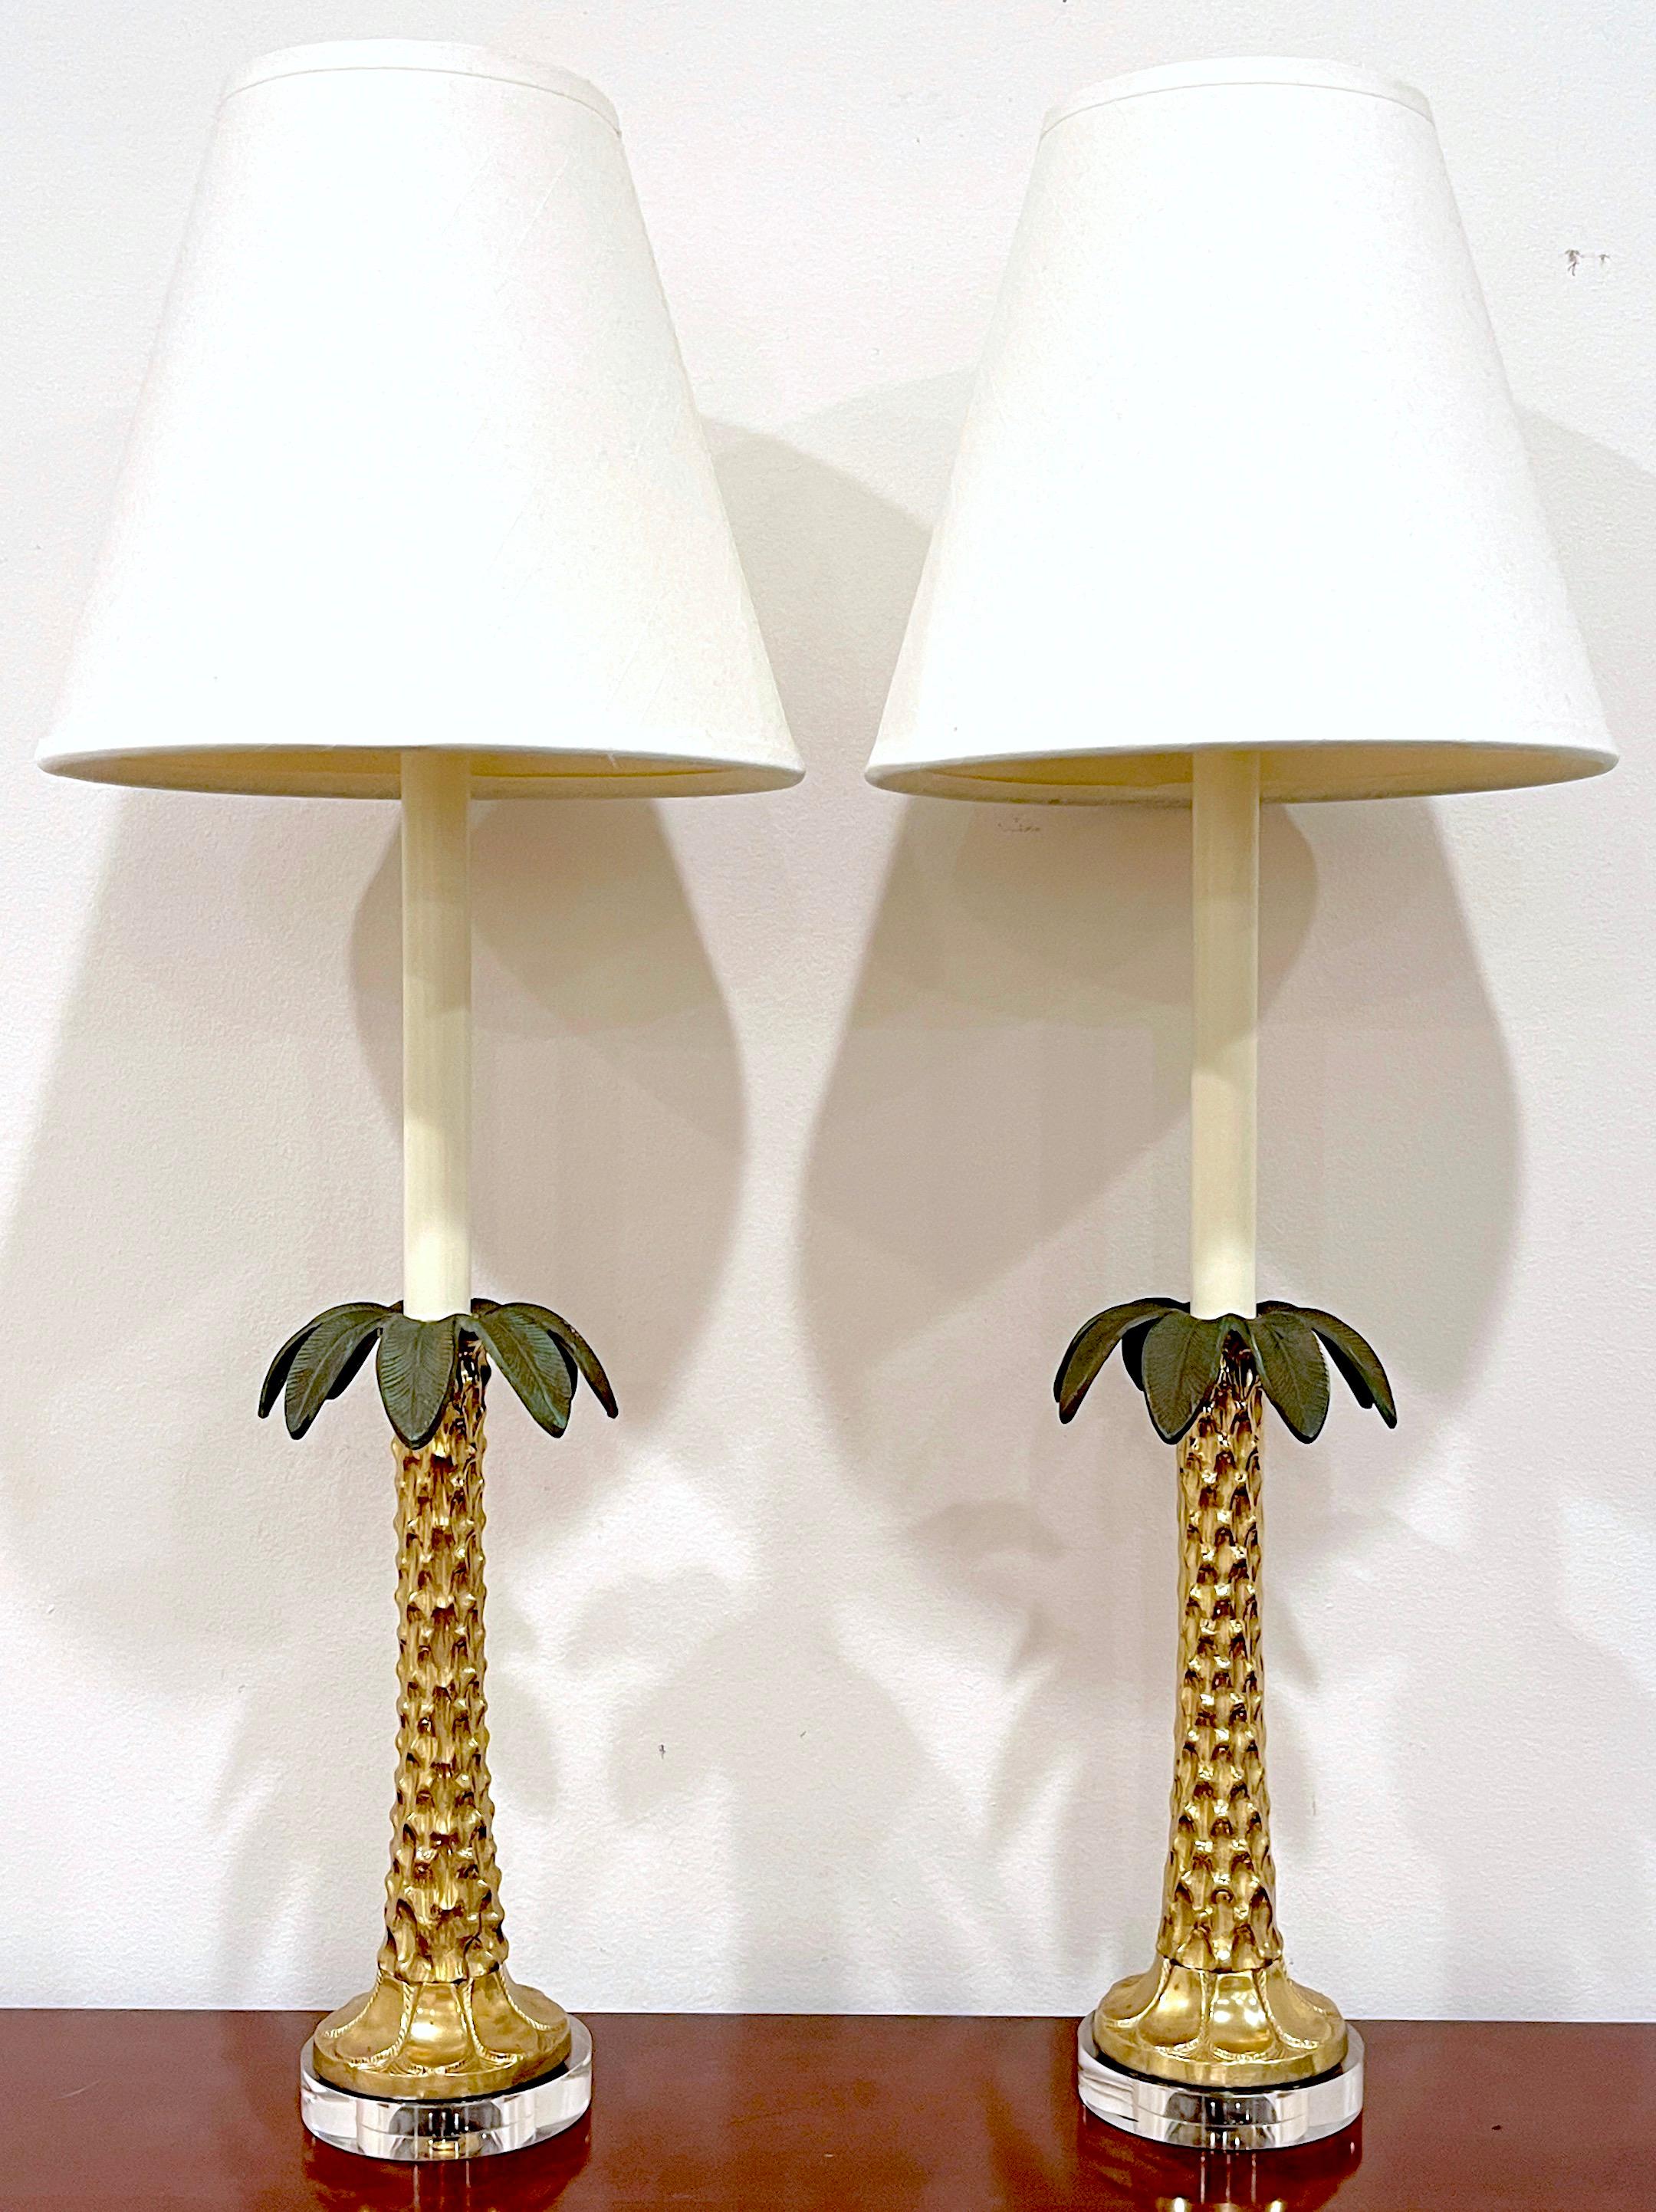 Pair of Enameled Brass & Lucite Palm Tree Lamps
USA, 1980s
A striking pair of Enameled Brass & Lucite Palm Tree Lamps from the 1980s encapsulates the essence of tropical whimsy. Each lamp features eight enameled palm fronds, The realistic cast and